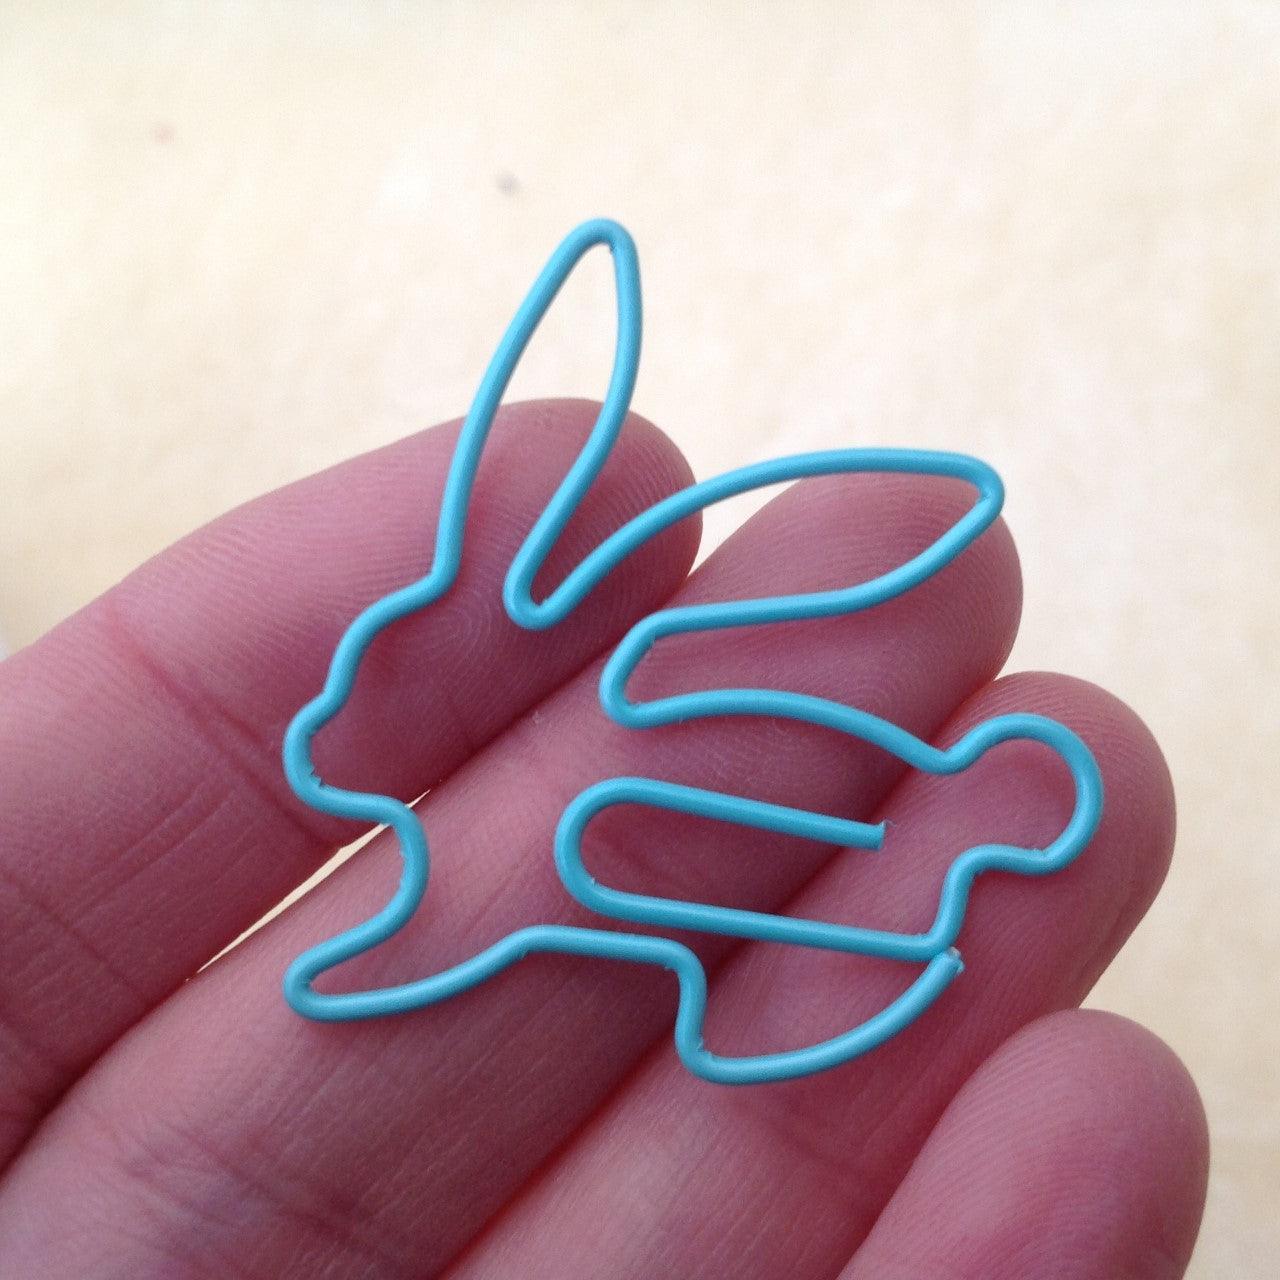 Belle & Boo Bunny Rabbit Shaped Paper Clip Box - Bunny Creations